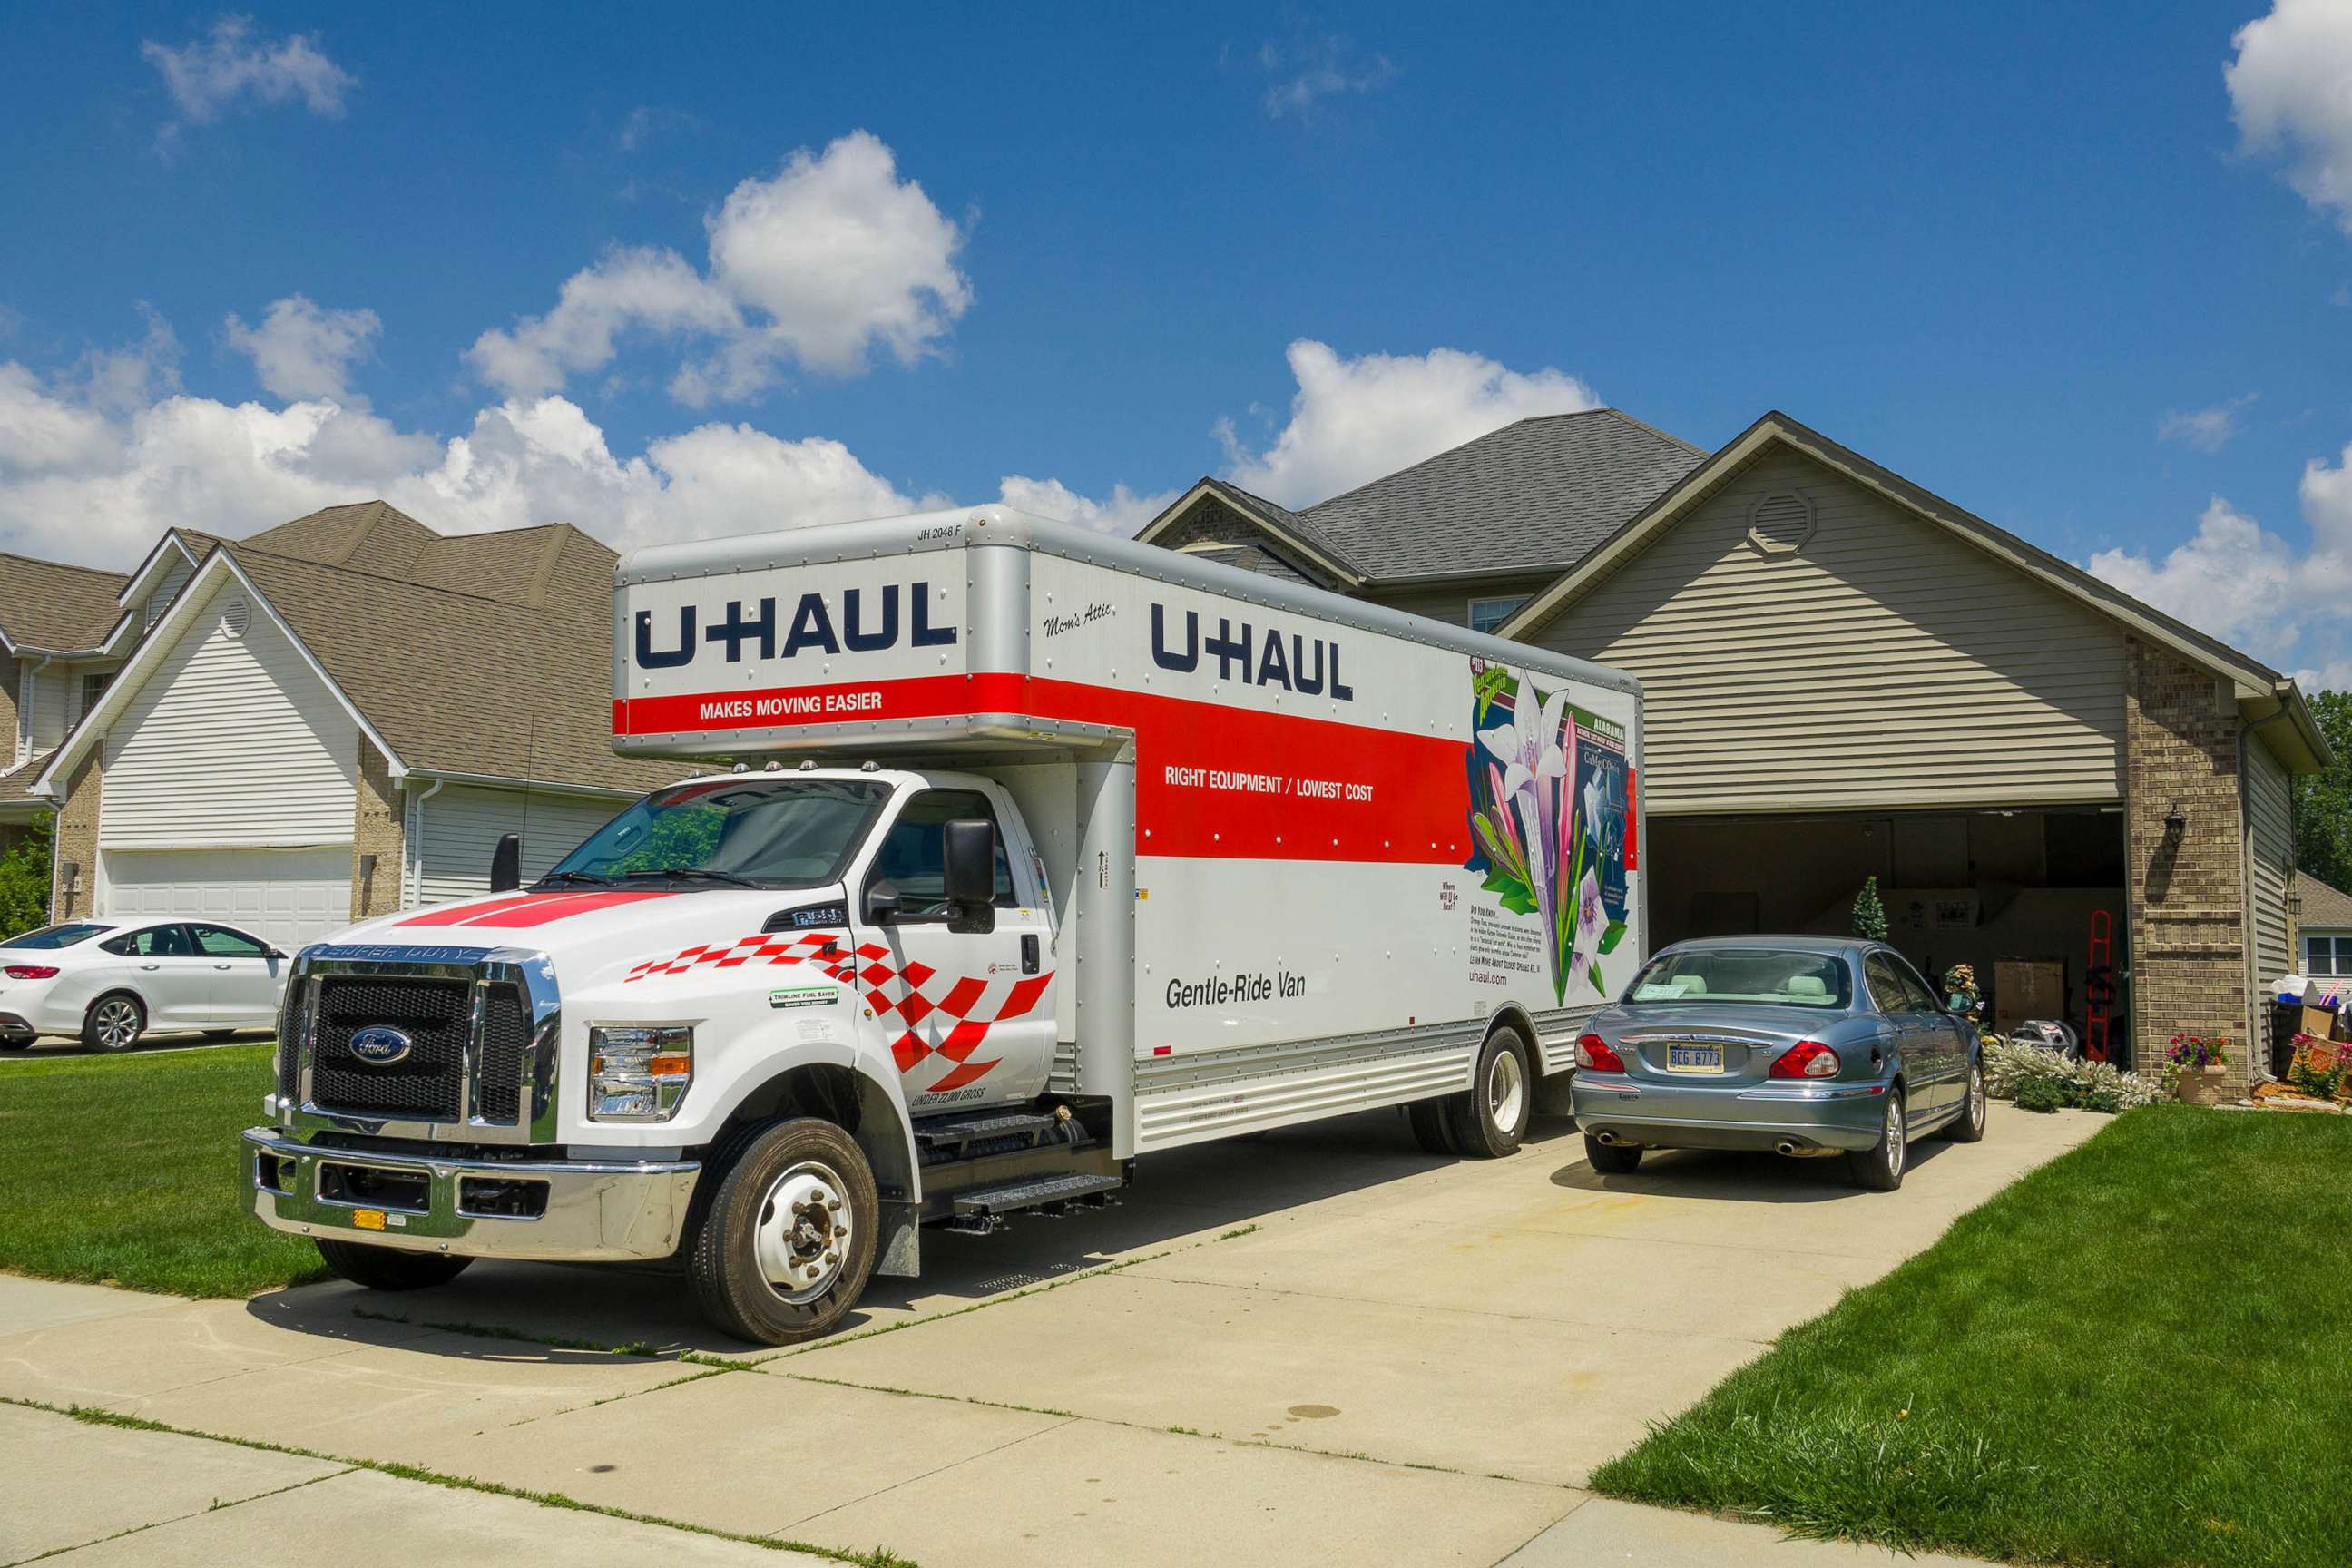 PHOTO: In this undated file photo, a U-Haul moving van is parked in the driveway of a house.